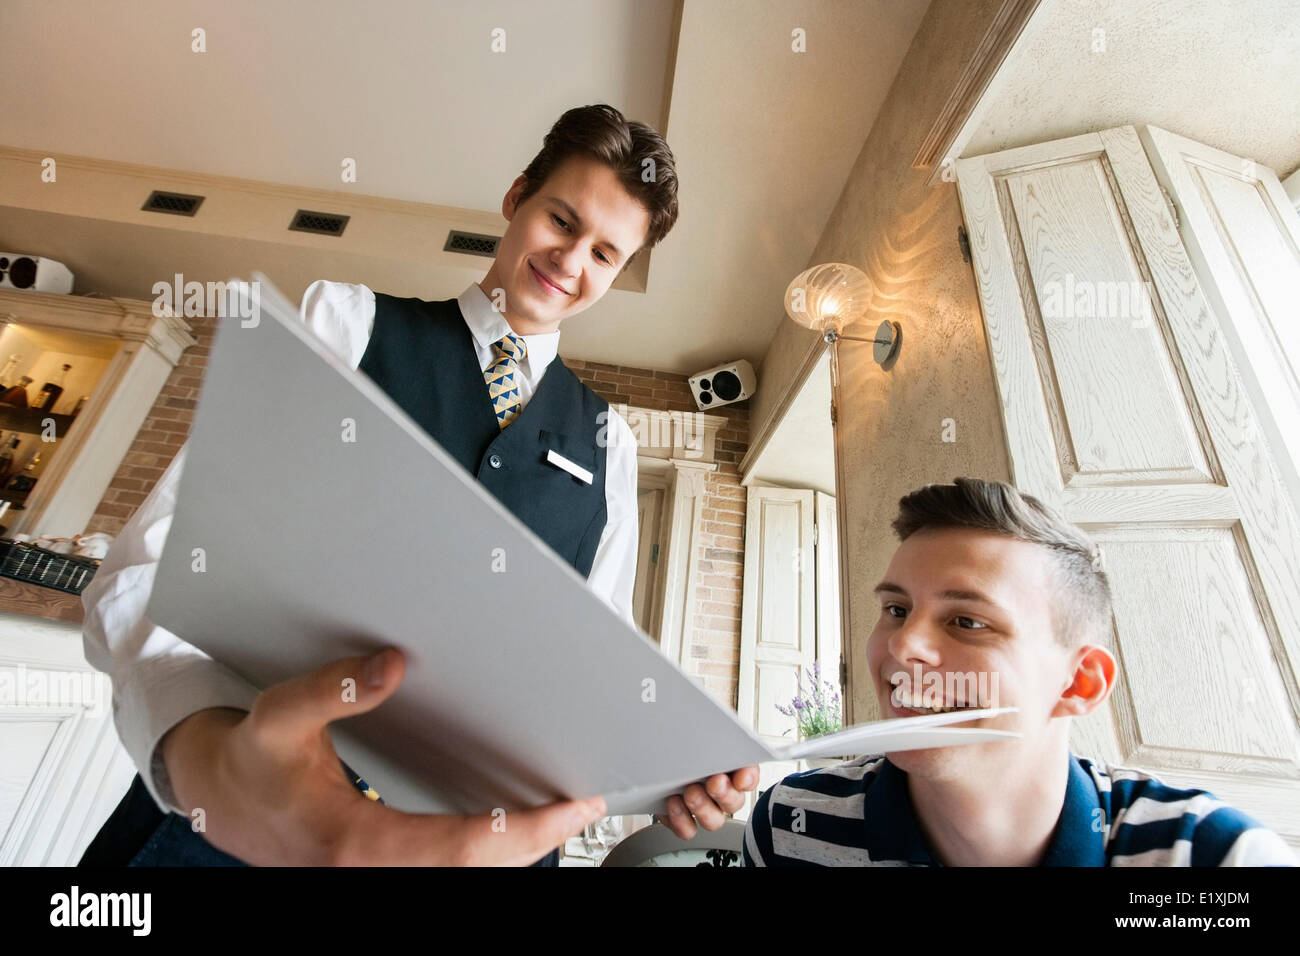 Low angle view of waiter showing menu to male customer in restaurant Stock Photo